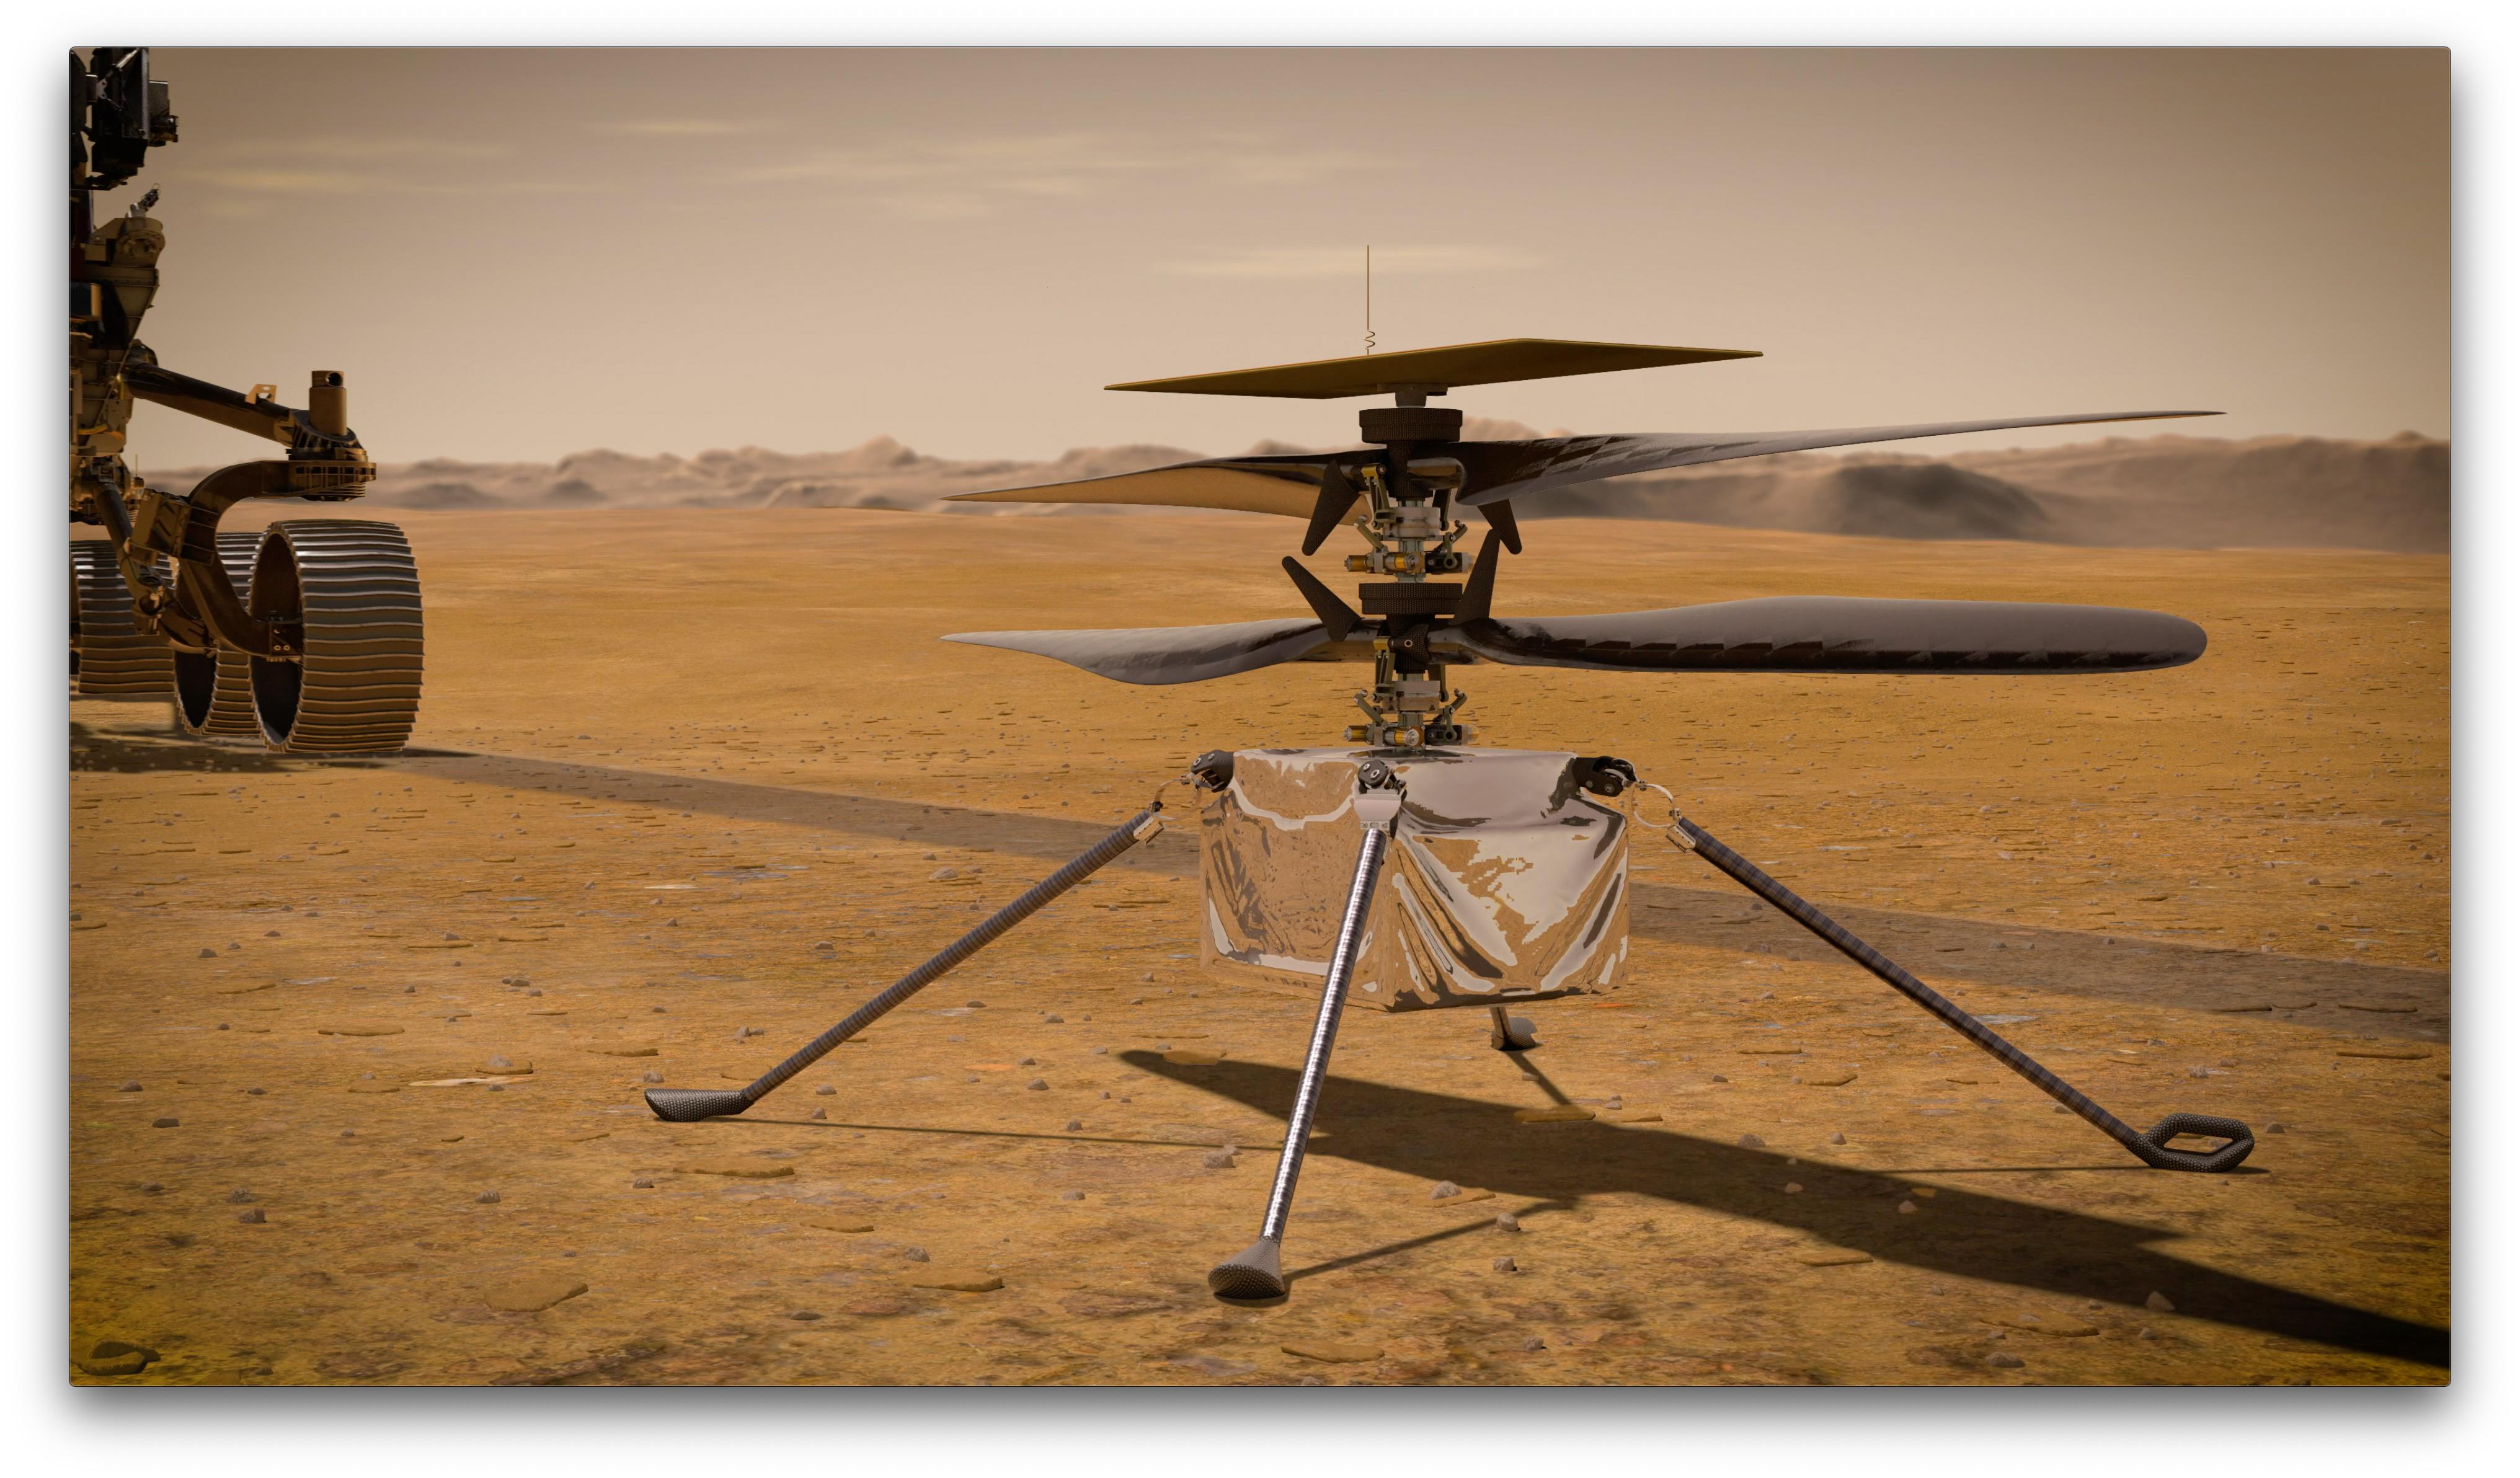 NASA’s Ingenuity Mars Helicopter Completes 50th Flight